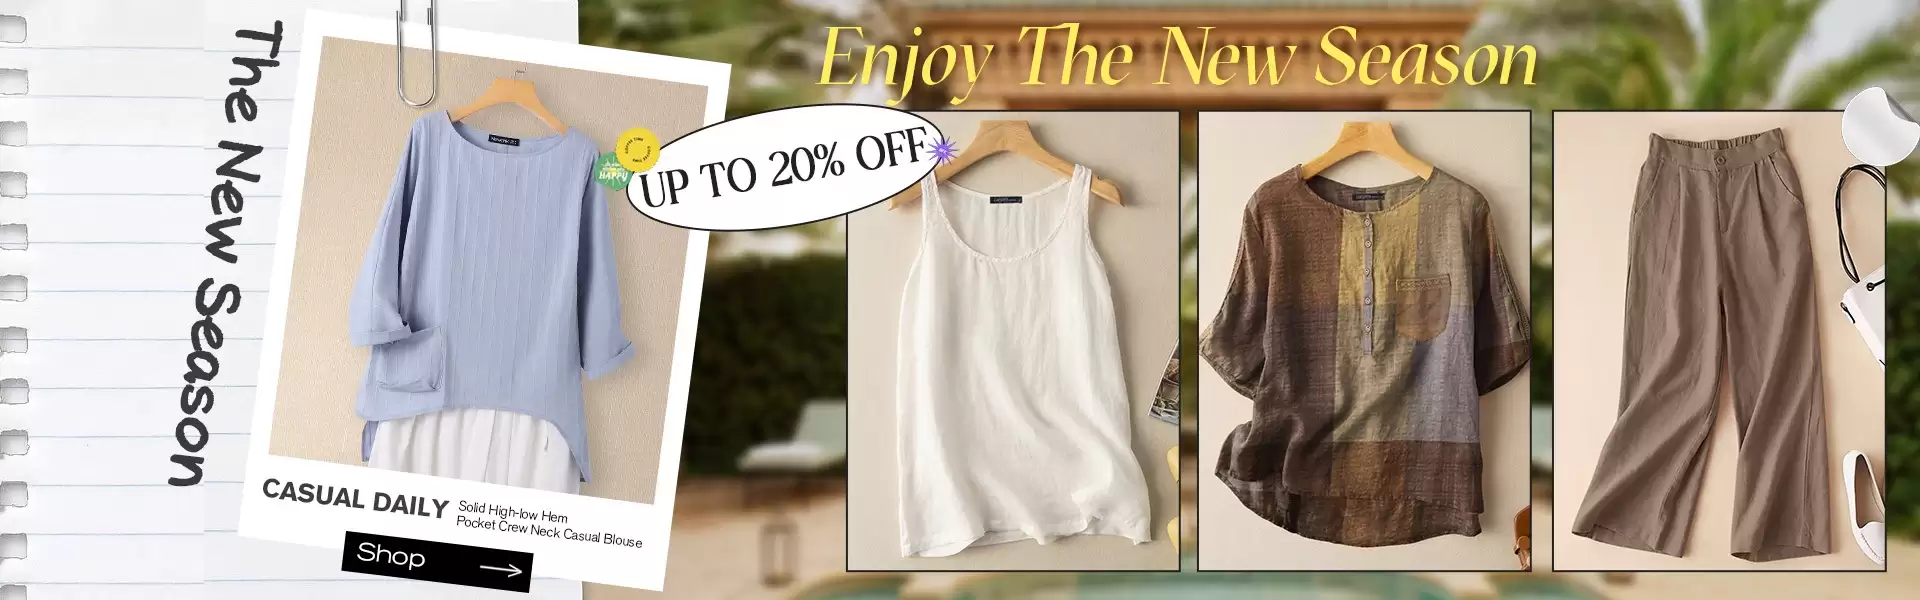 Get Upto 20% Off On New Seasons At Newchic Deal Page